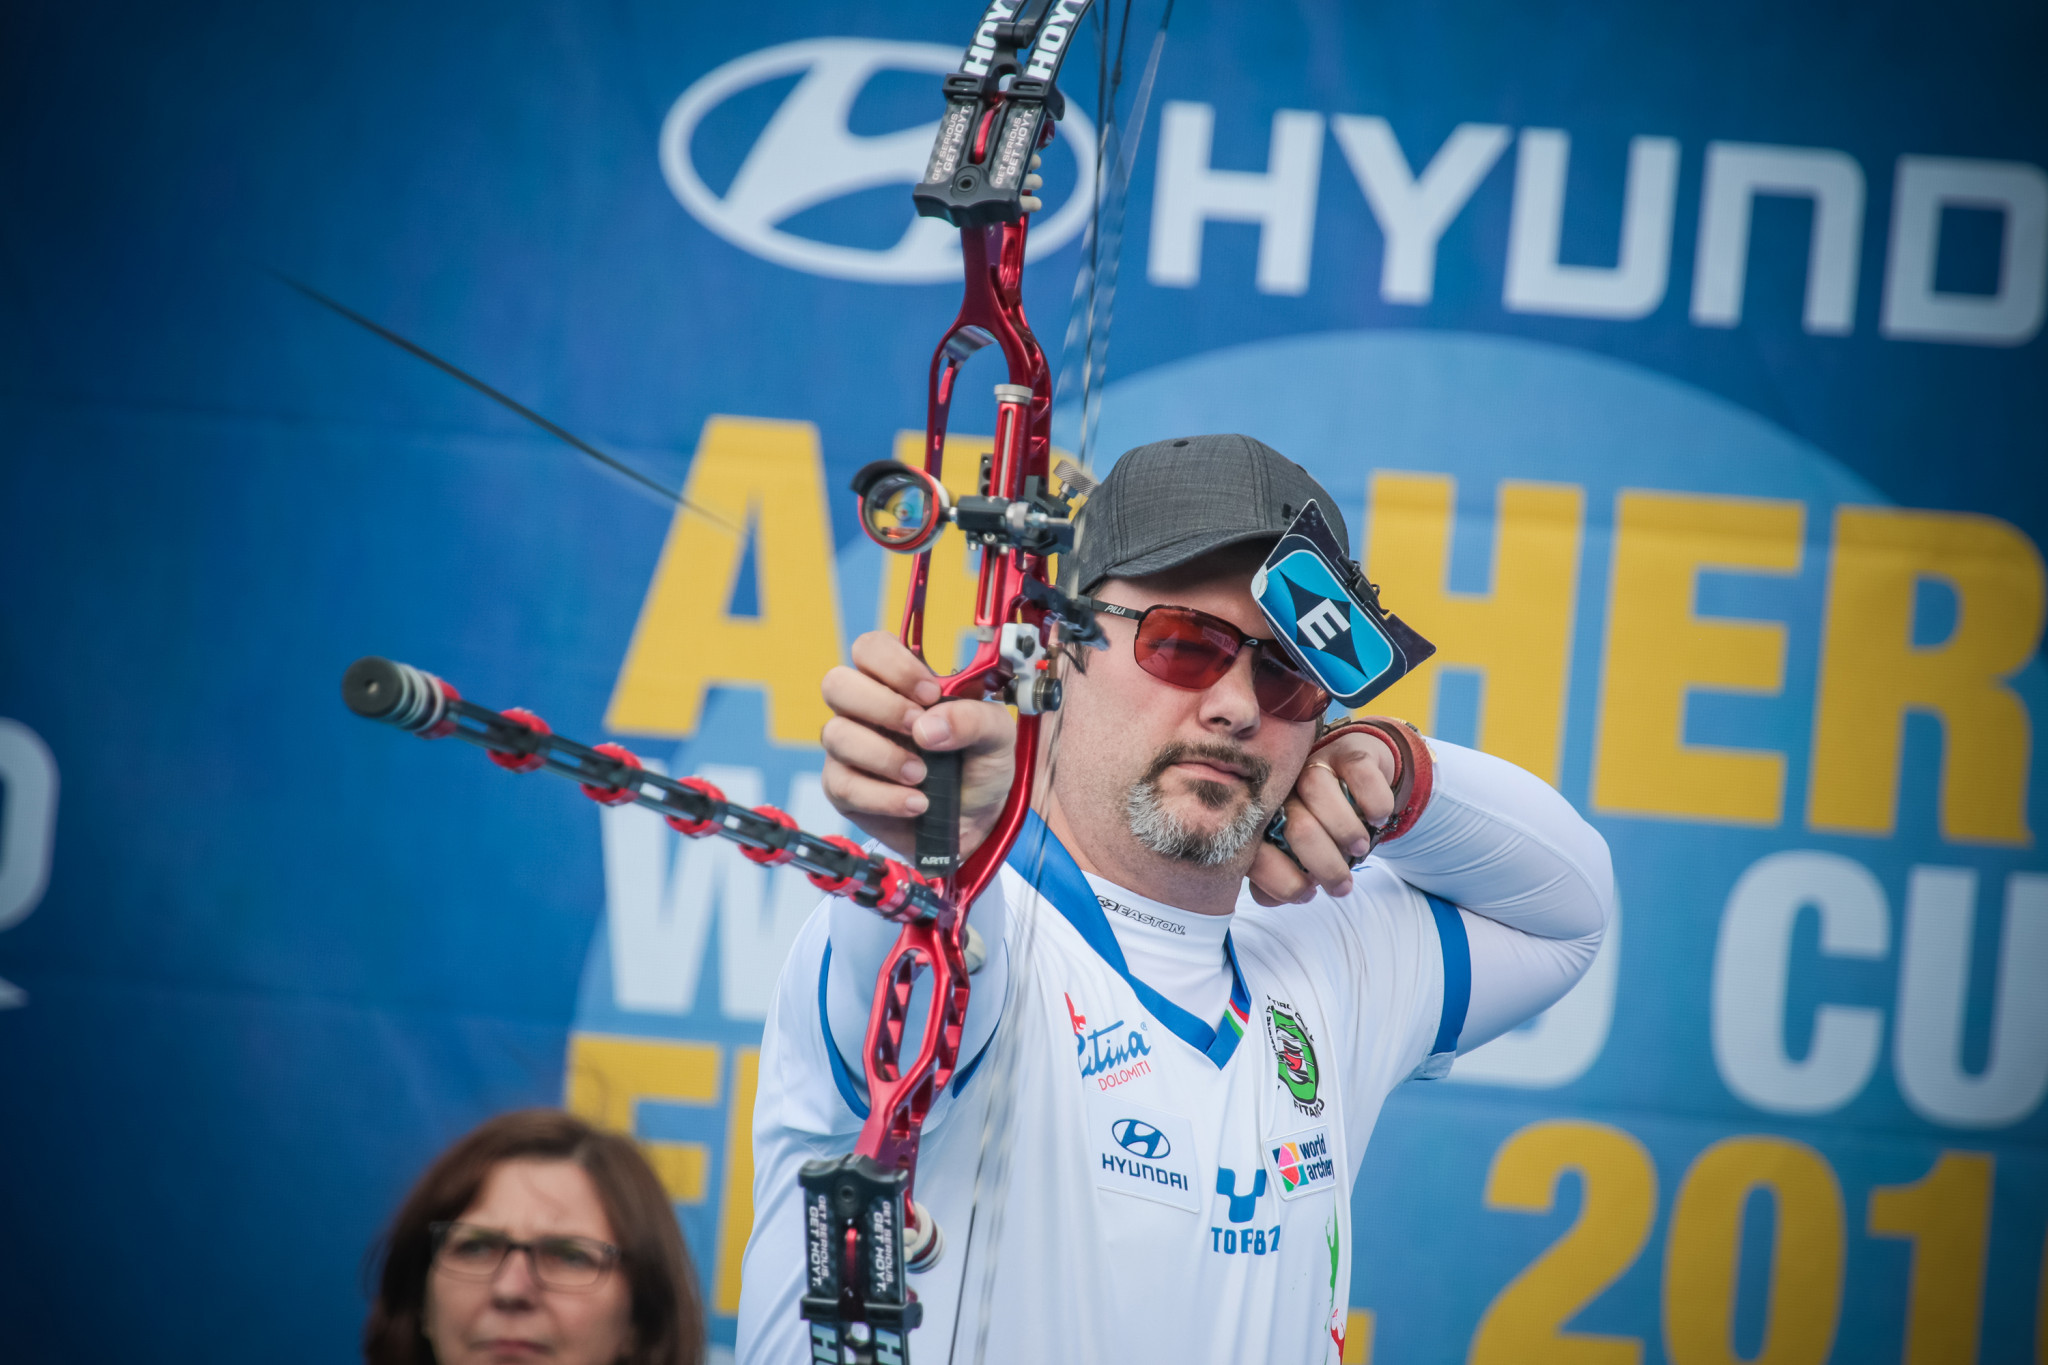 Sergio Pagni is set to make his first Archery World Cup appearance in two years ©Getty Images